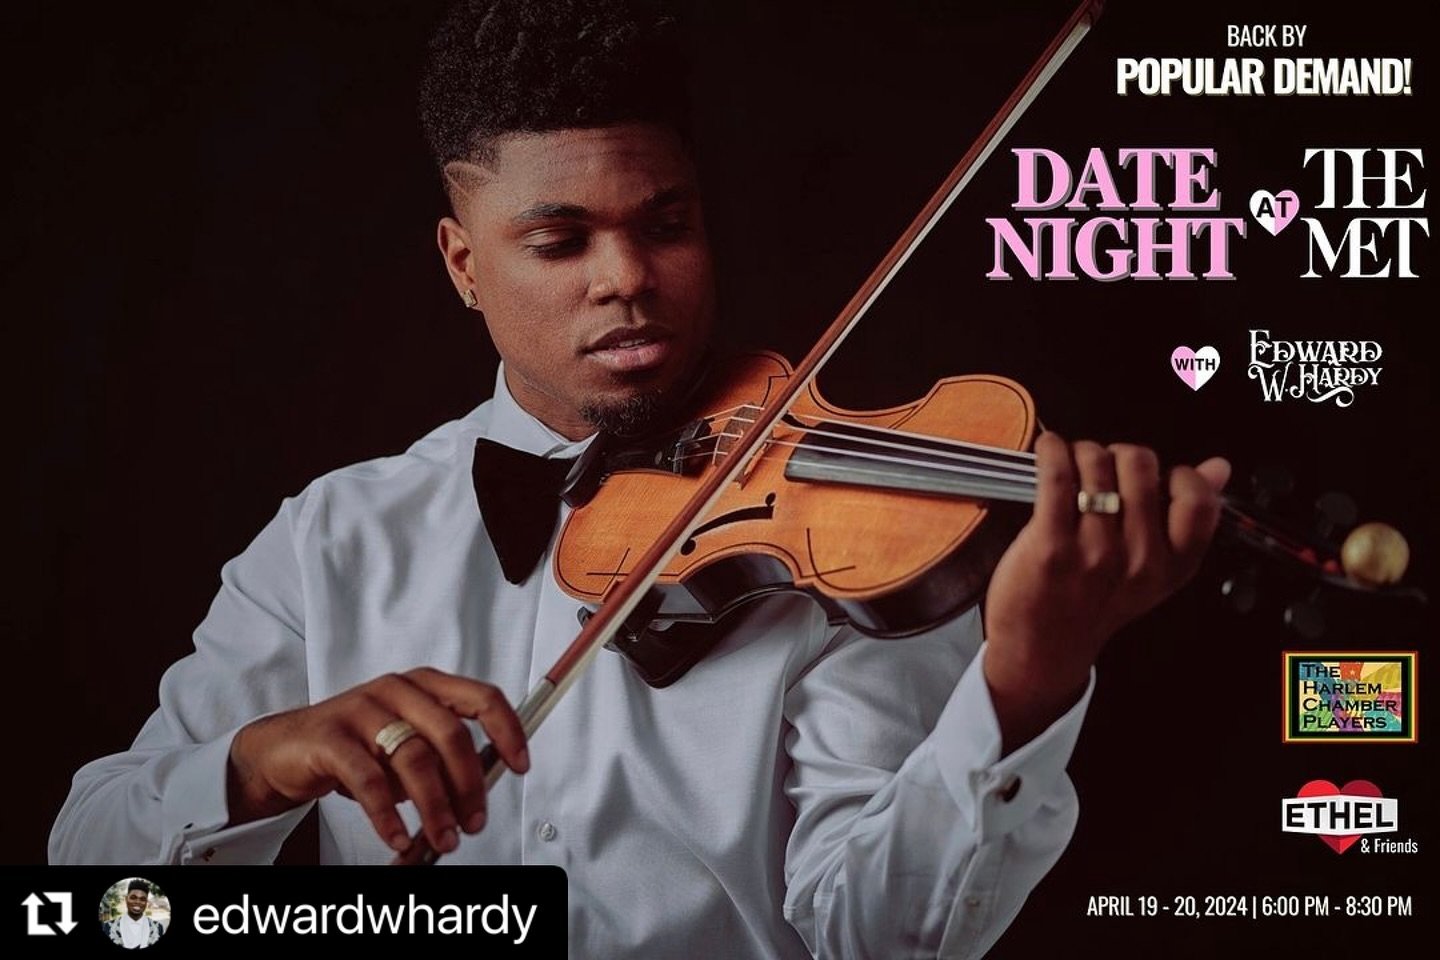 This Friday and Saturday from 6-8:30 PM come out and hear violinist Edward W. Hardy in his solo set as part of Date Night/ETHEL Series at The Met Museum in the Balcony Cafe. Edward will perform music by Samuel Coleridge-Taylor, William Grant Still, D